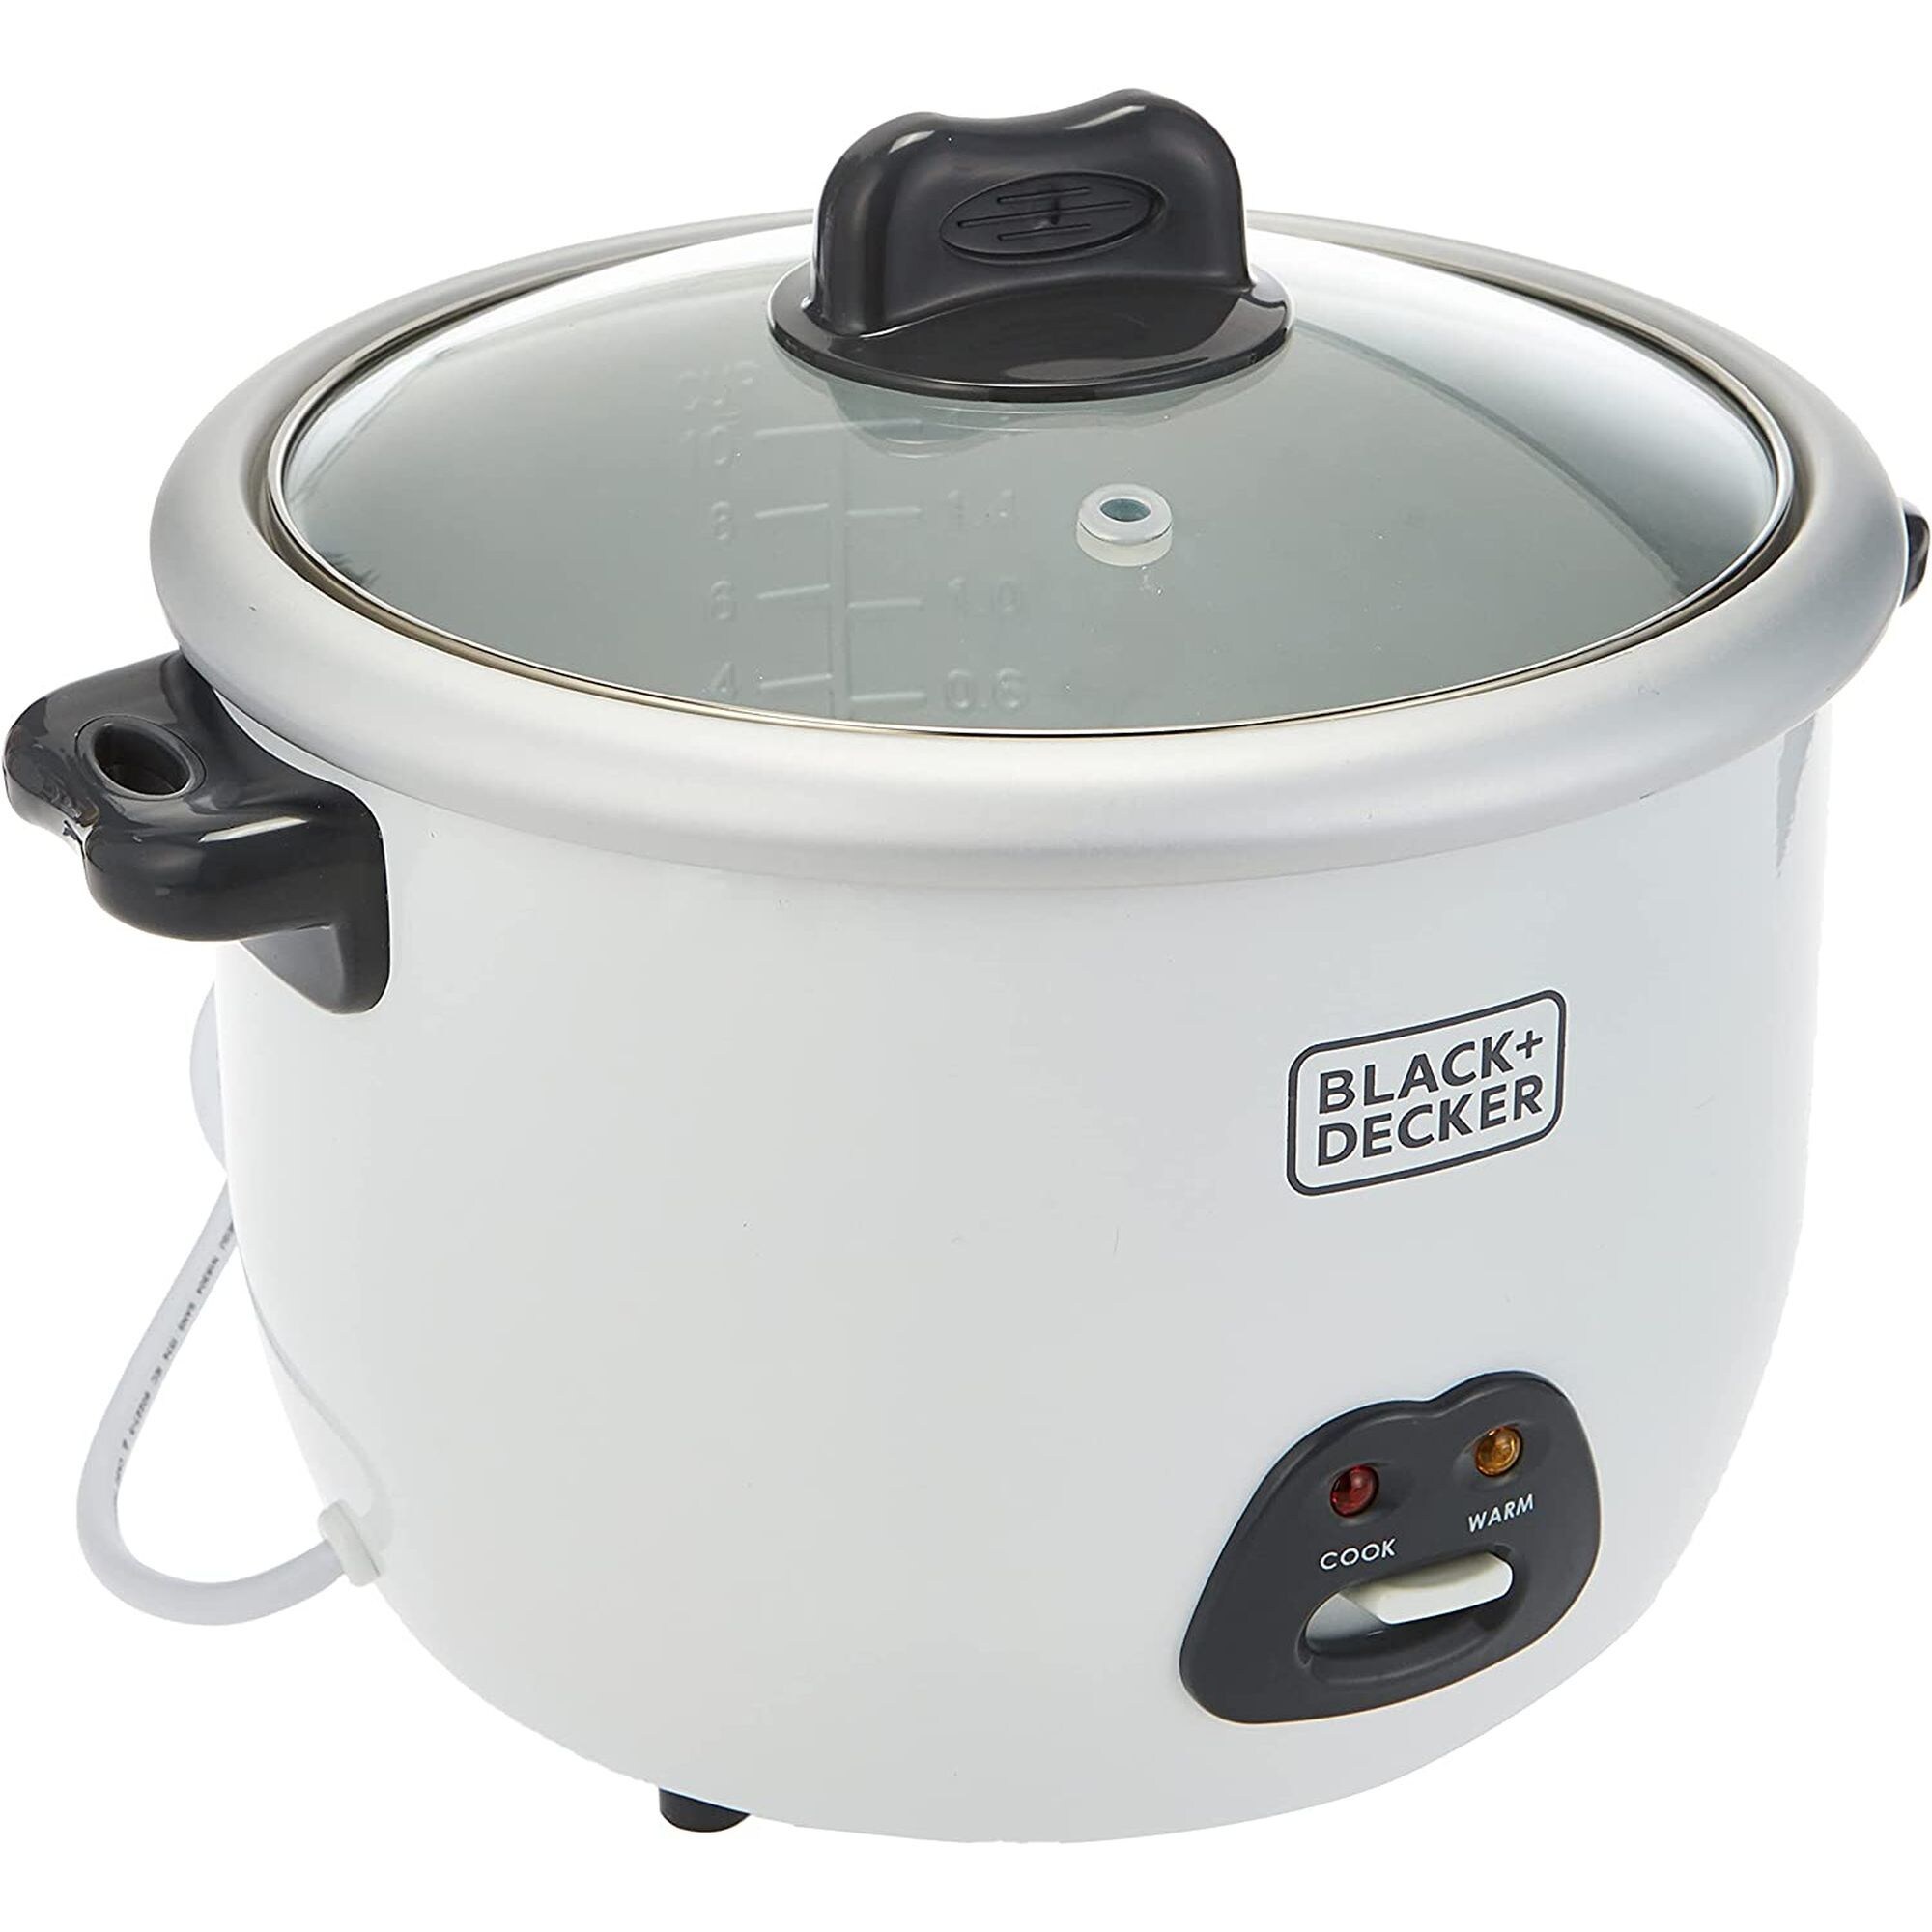 Black & Decker Rice Cooker With Glass Lid, 1.8 Ltr